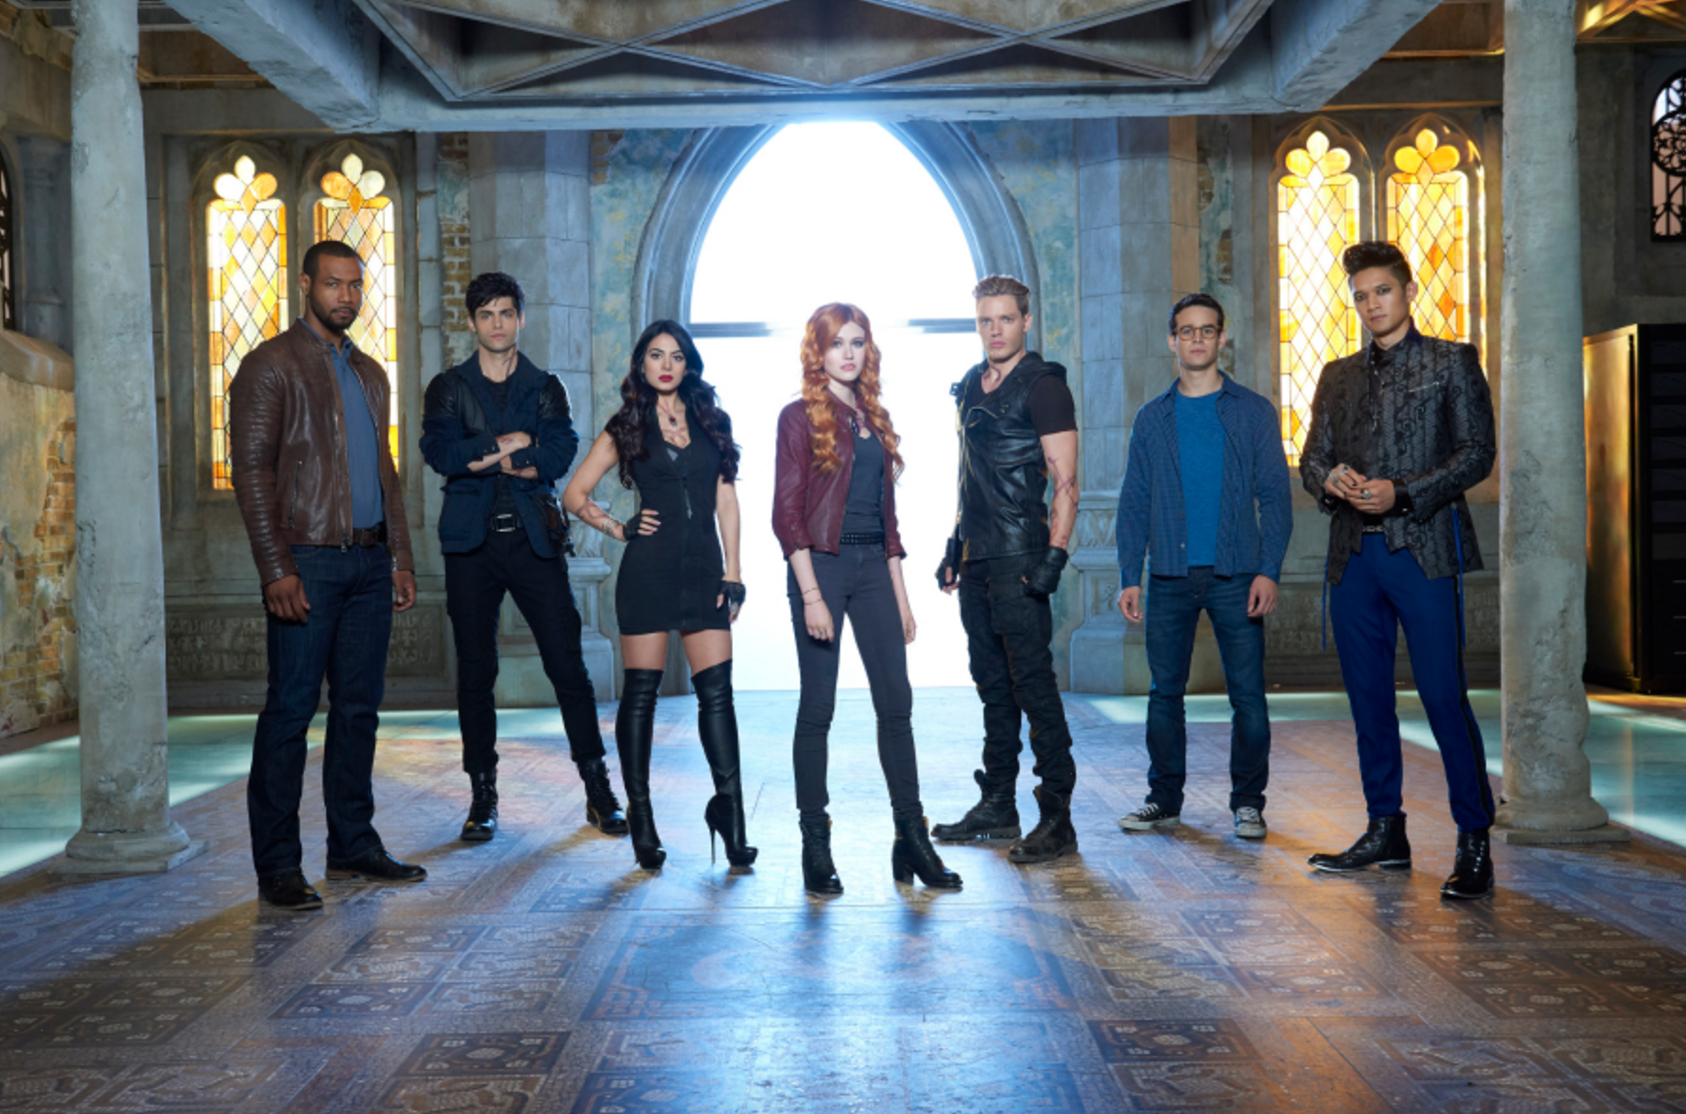 Shadowhunters 1.01- “The Mortal Cup”